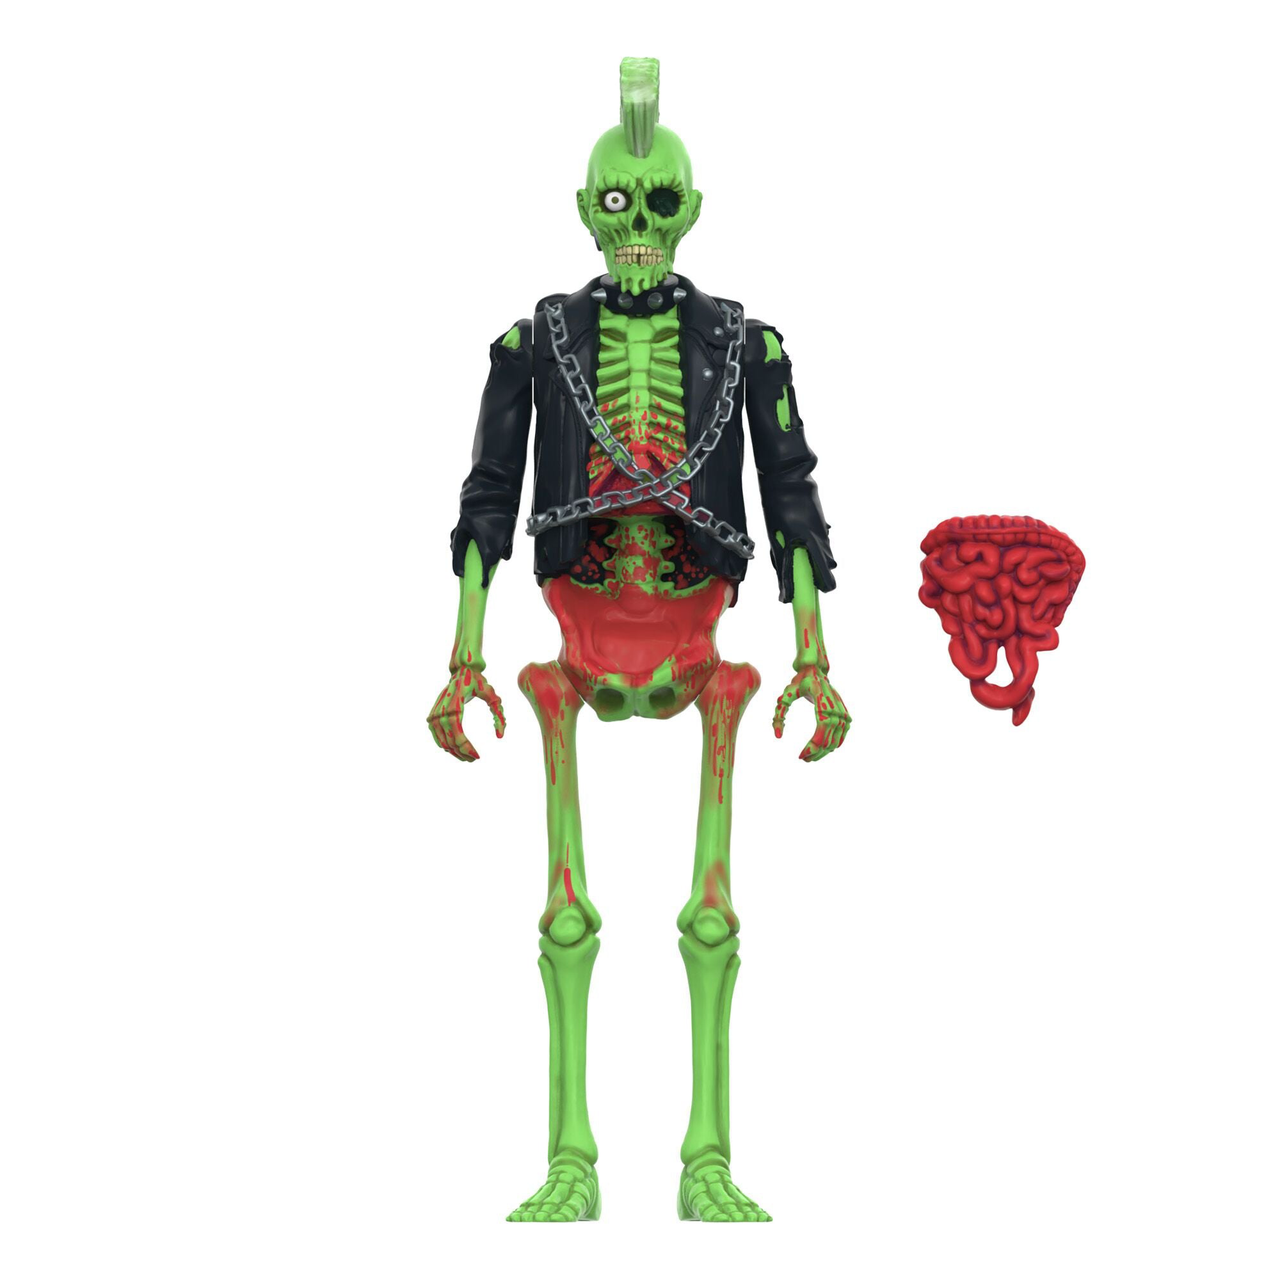 Return of the Living Dead Zombie Suicide Figure by Super7